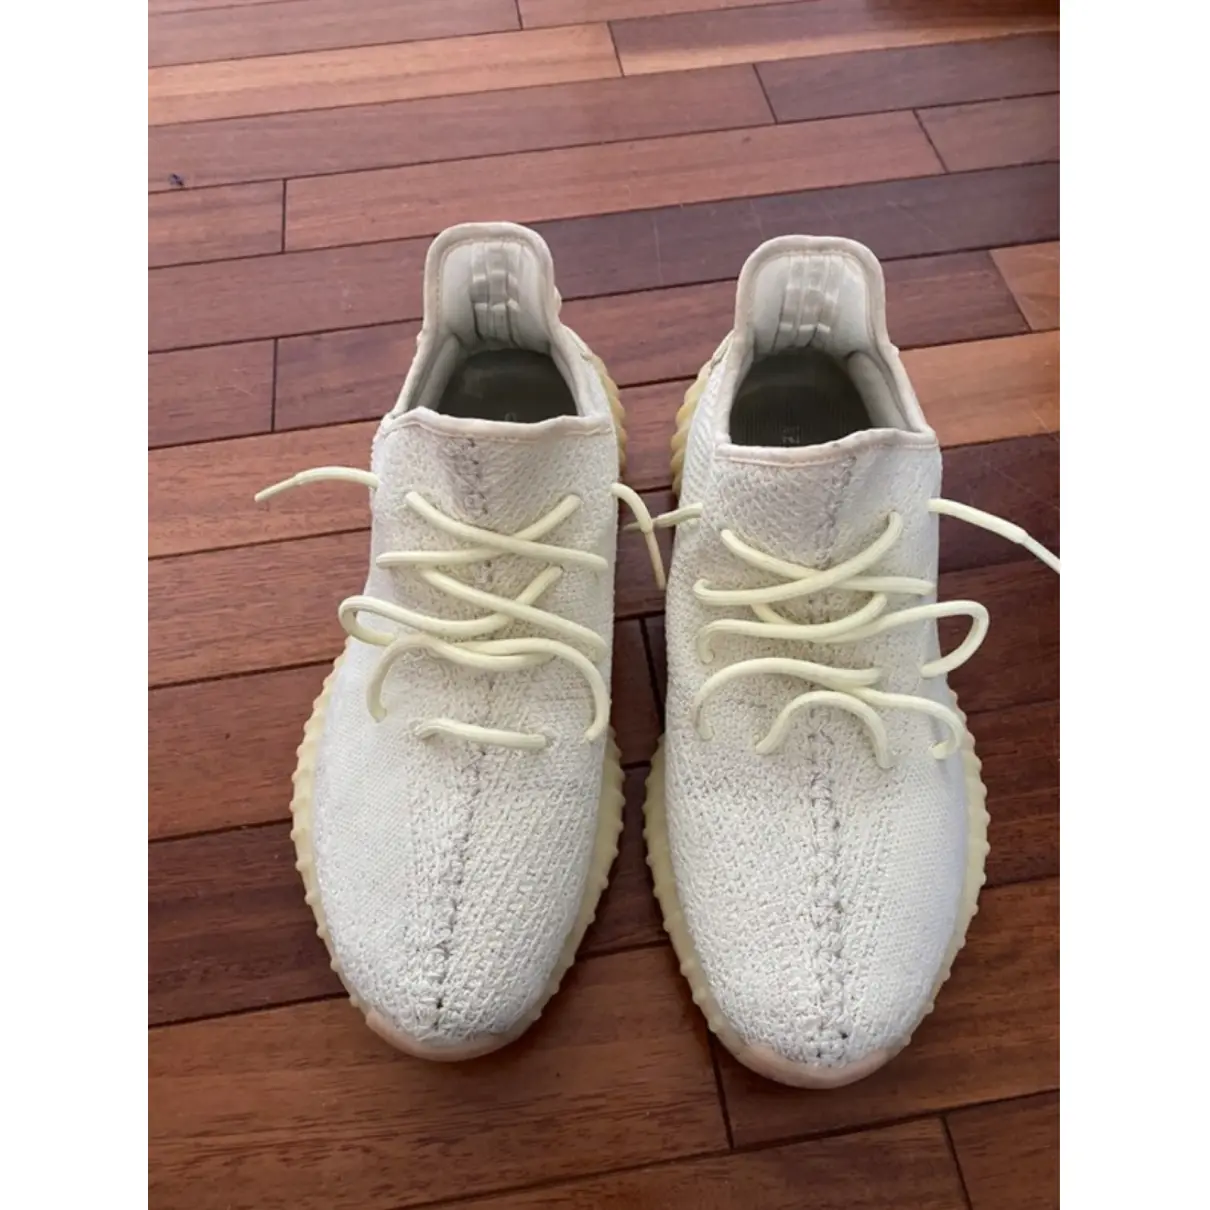 Buy Yeezy x Adidas Boost 350 V1 cloth low trainers online